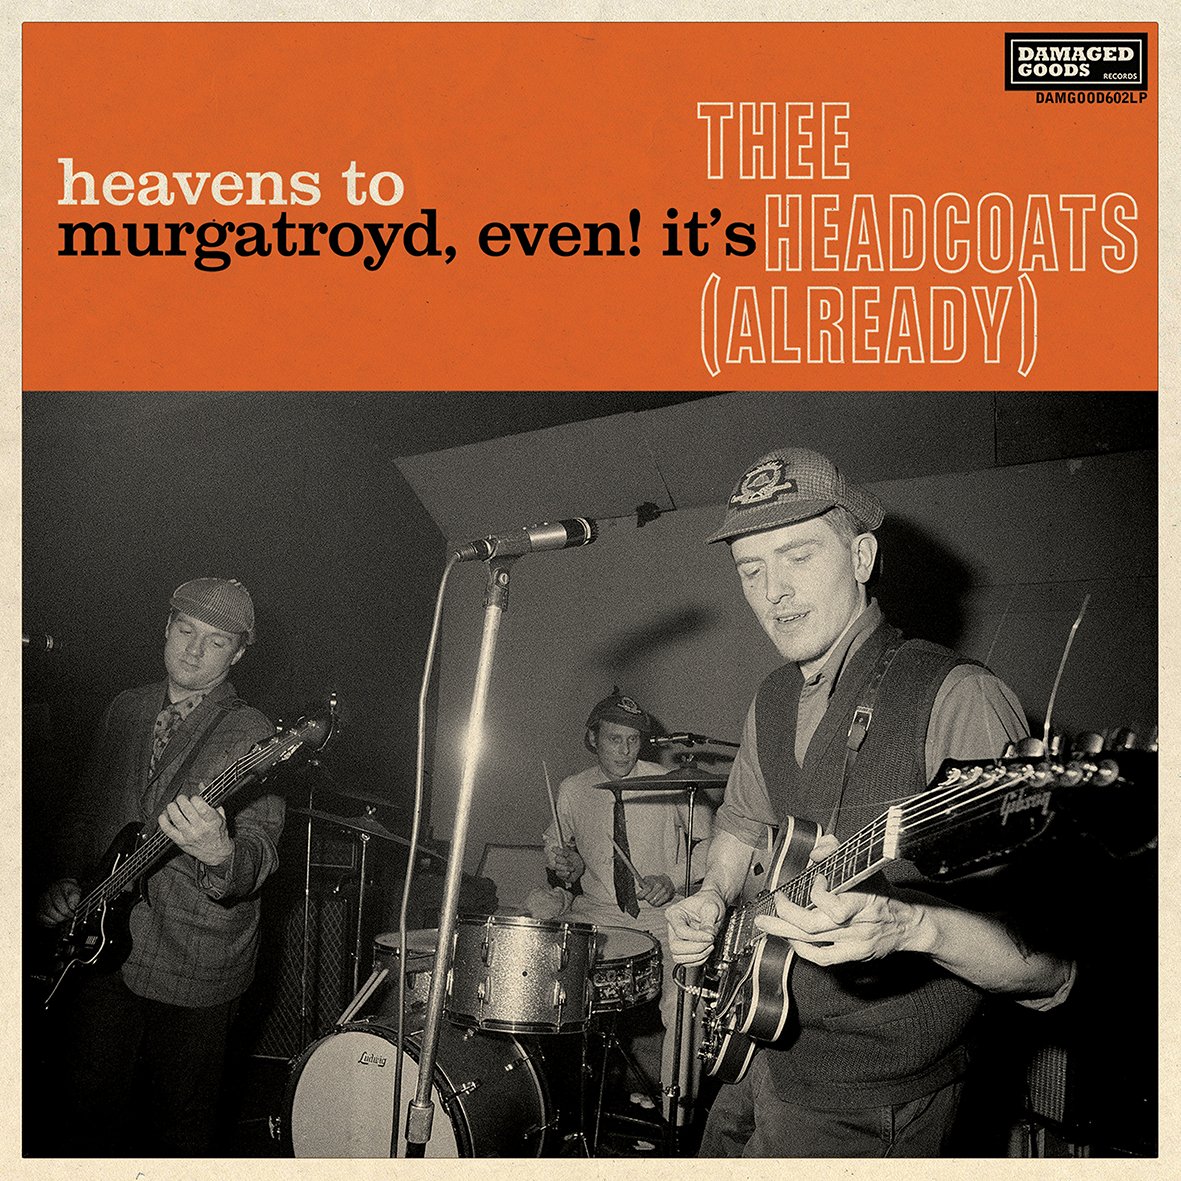 OUT AGAIN...FINALLY! (This Friday) It's THEE HEADCOATS classic 1991 album 'Heavens to Murgatroyd, Even! It's Thee Headcoats (Already)' on LP & CD, get it from your local record shop or here damagedgoods.greedbag.com @ChildishInfo